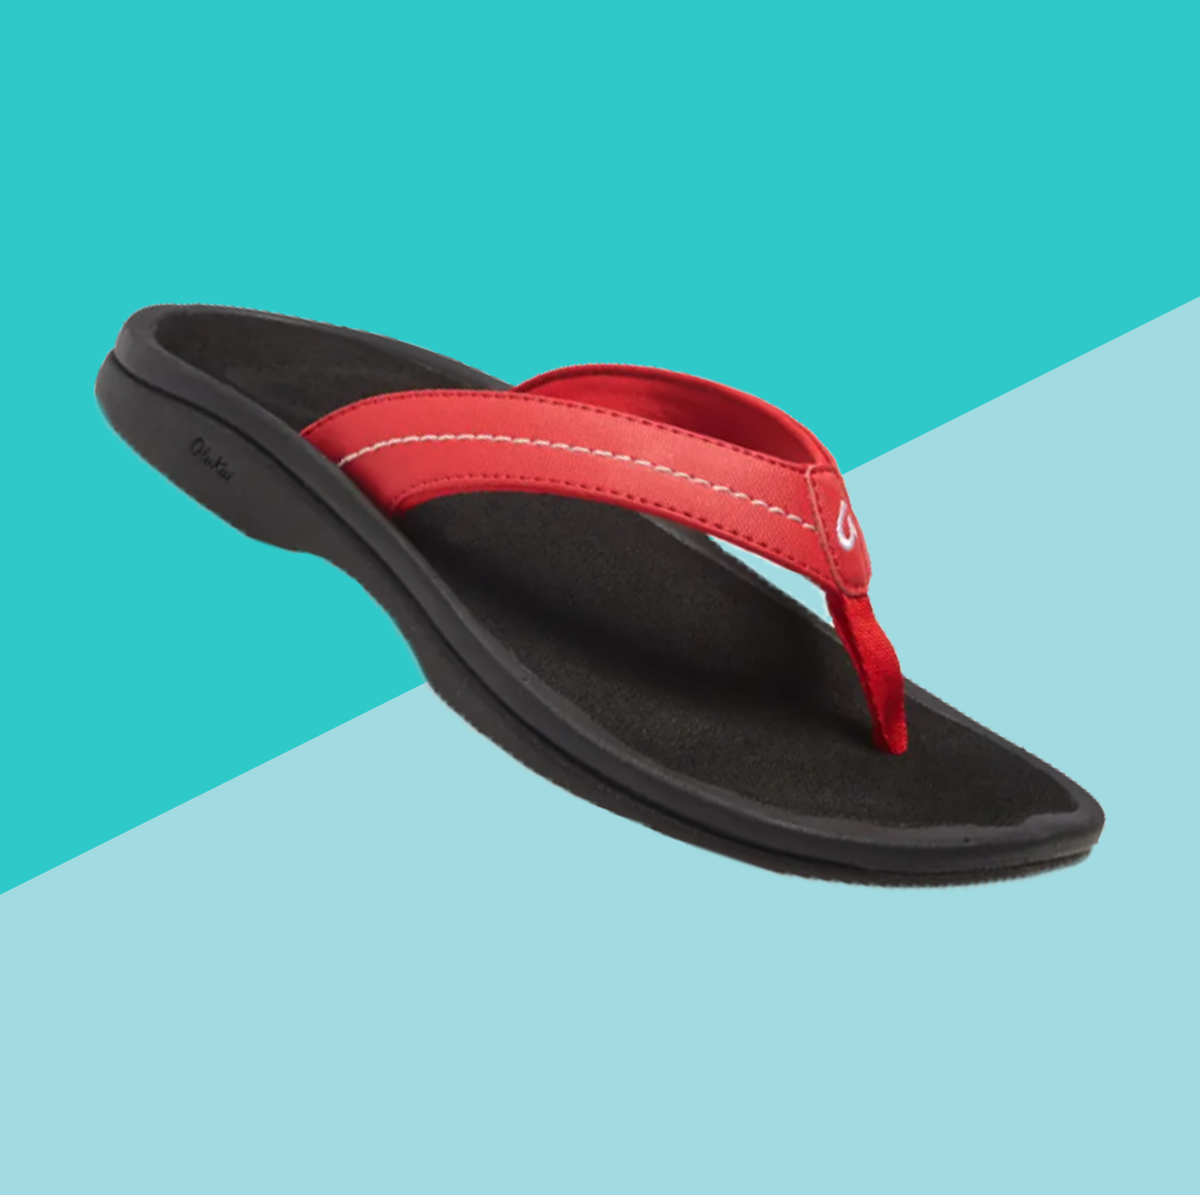 The Best Flip-Flops With Arch Support, According To A Podiatrist